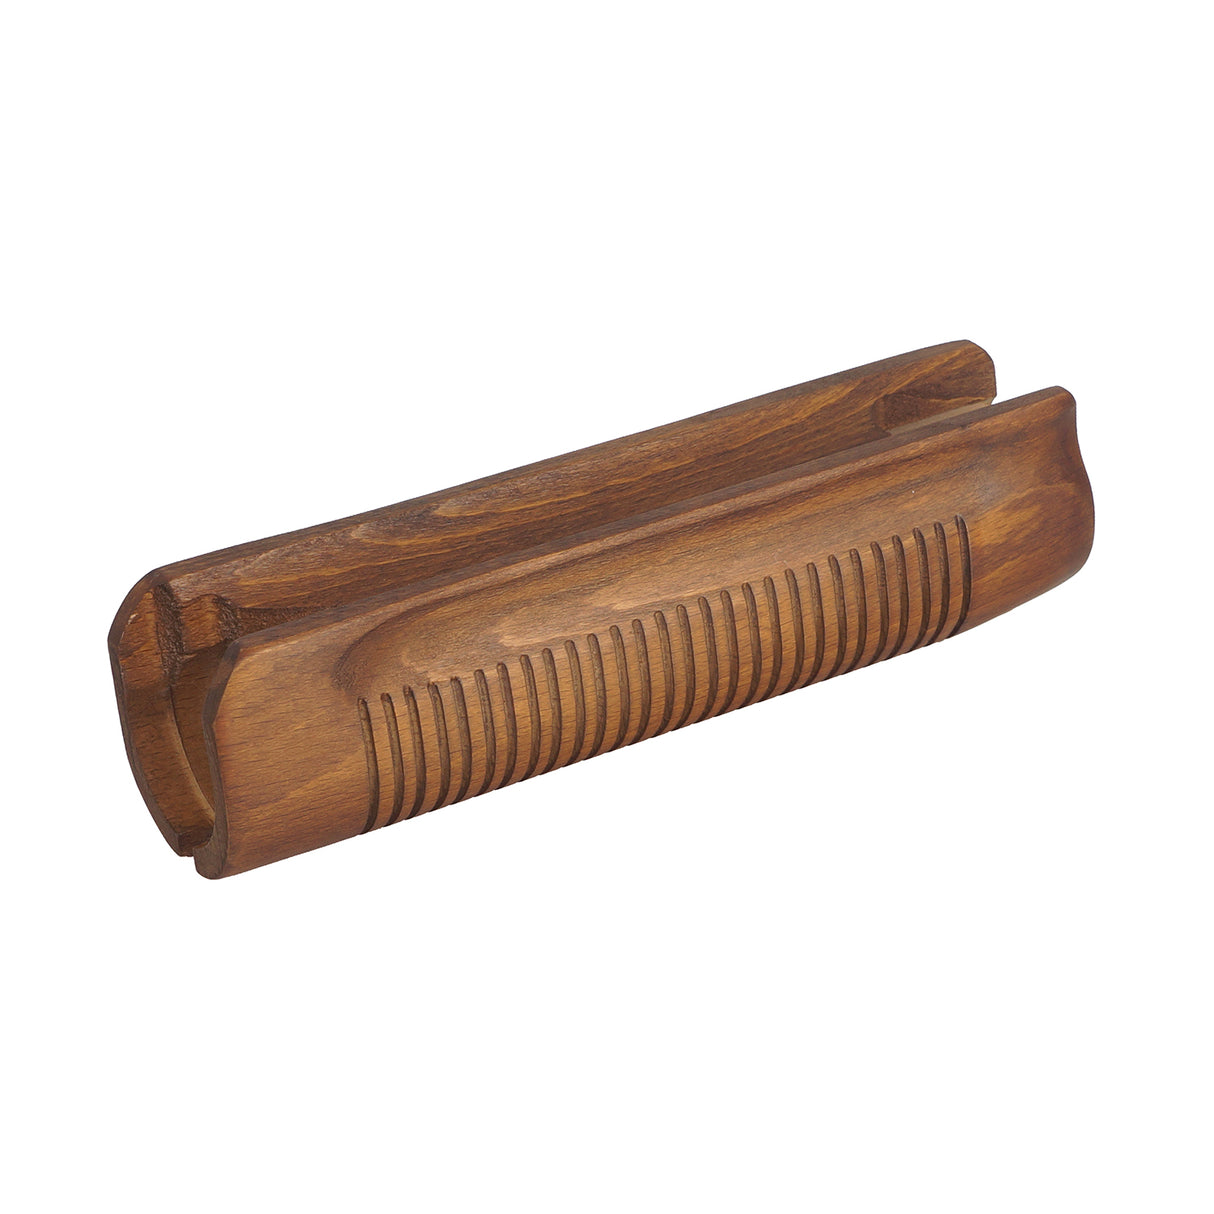 APS Police Style Wooden Forend for CAM870 Shotgun ( APS-CAM162 )